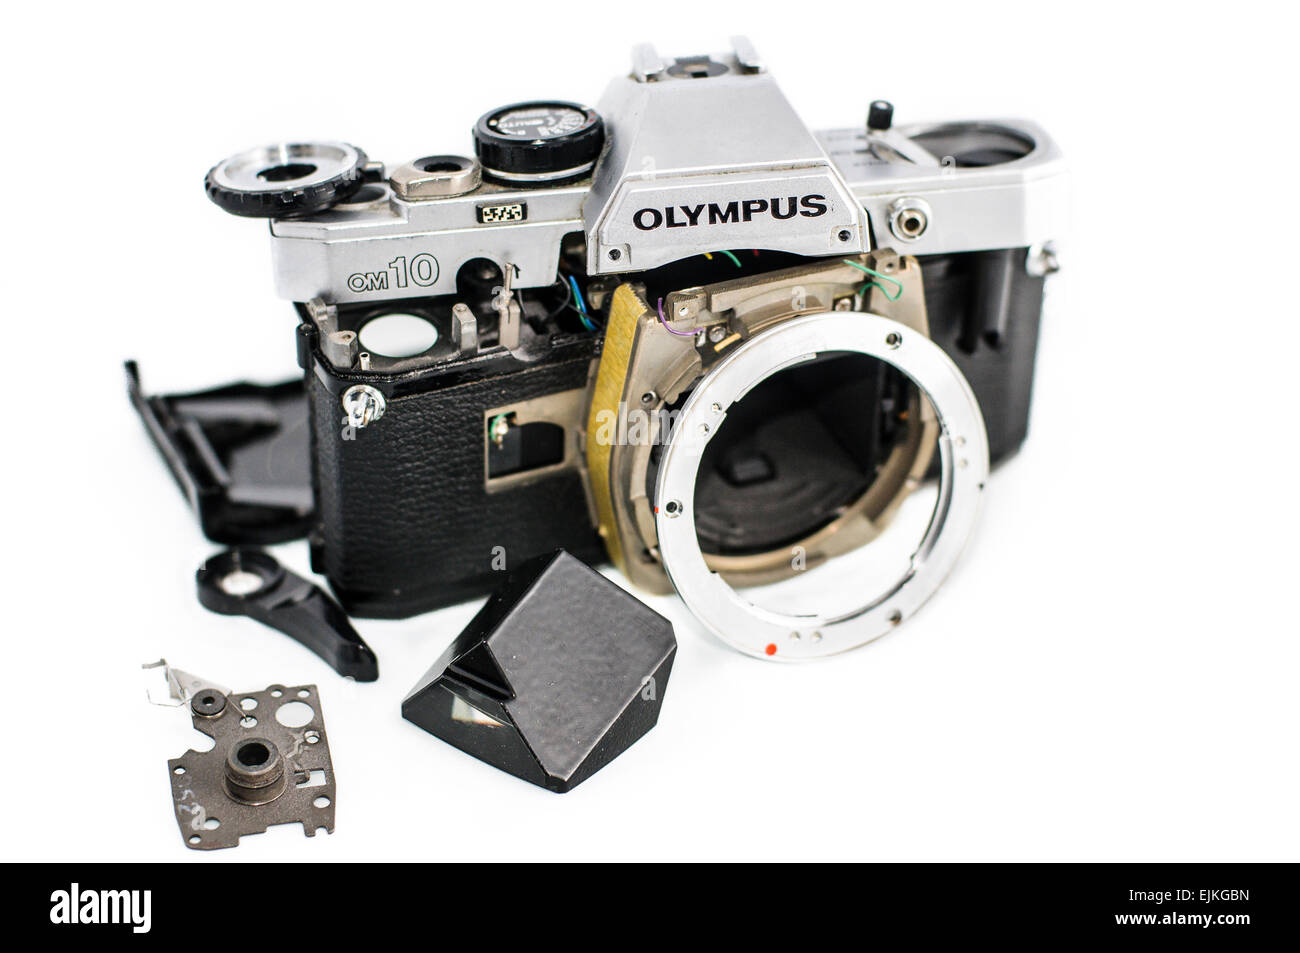 Olympus OM-10 35mm SLR camera in pieces, broken, and in need of repair Stock Photo